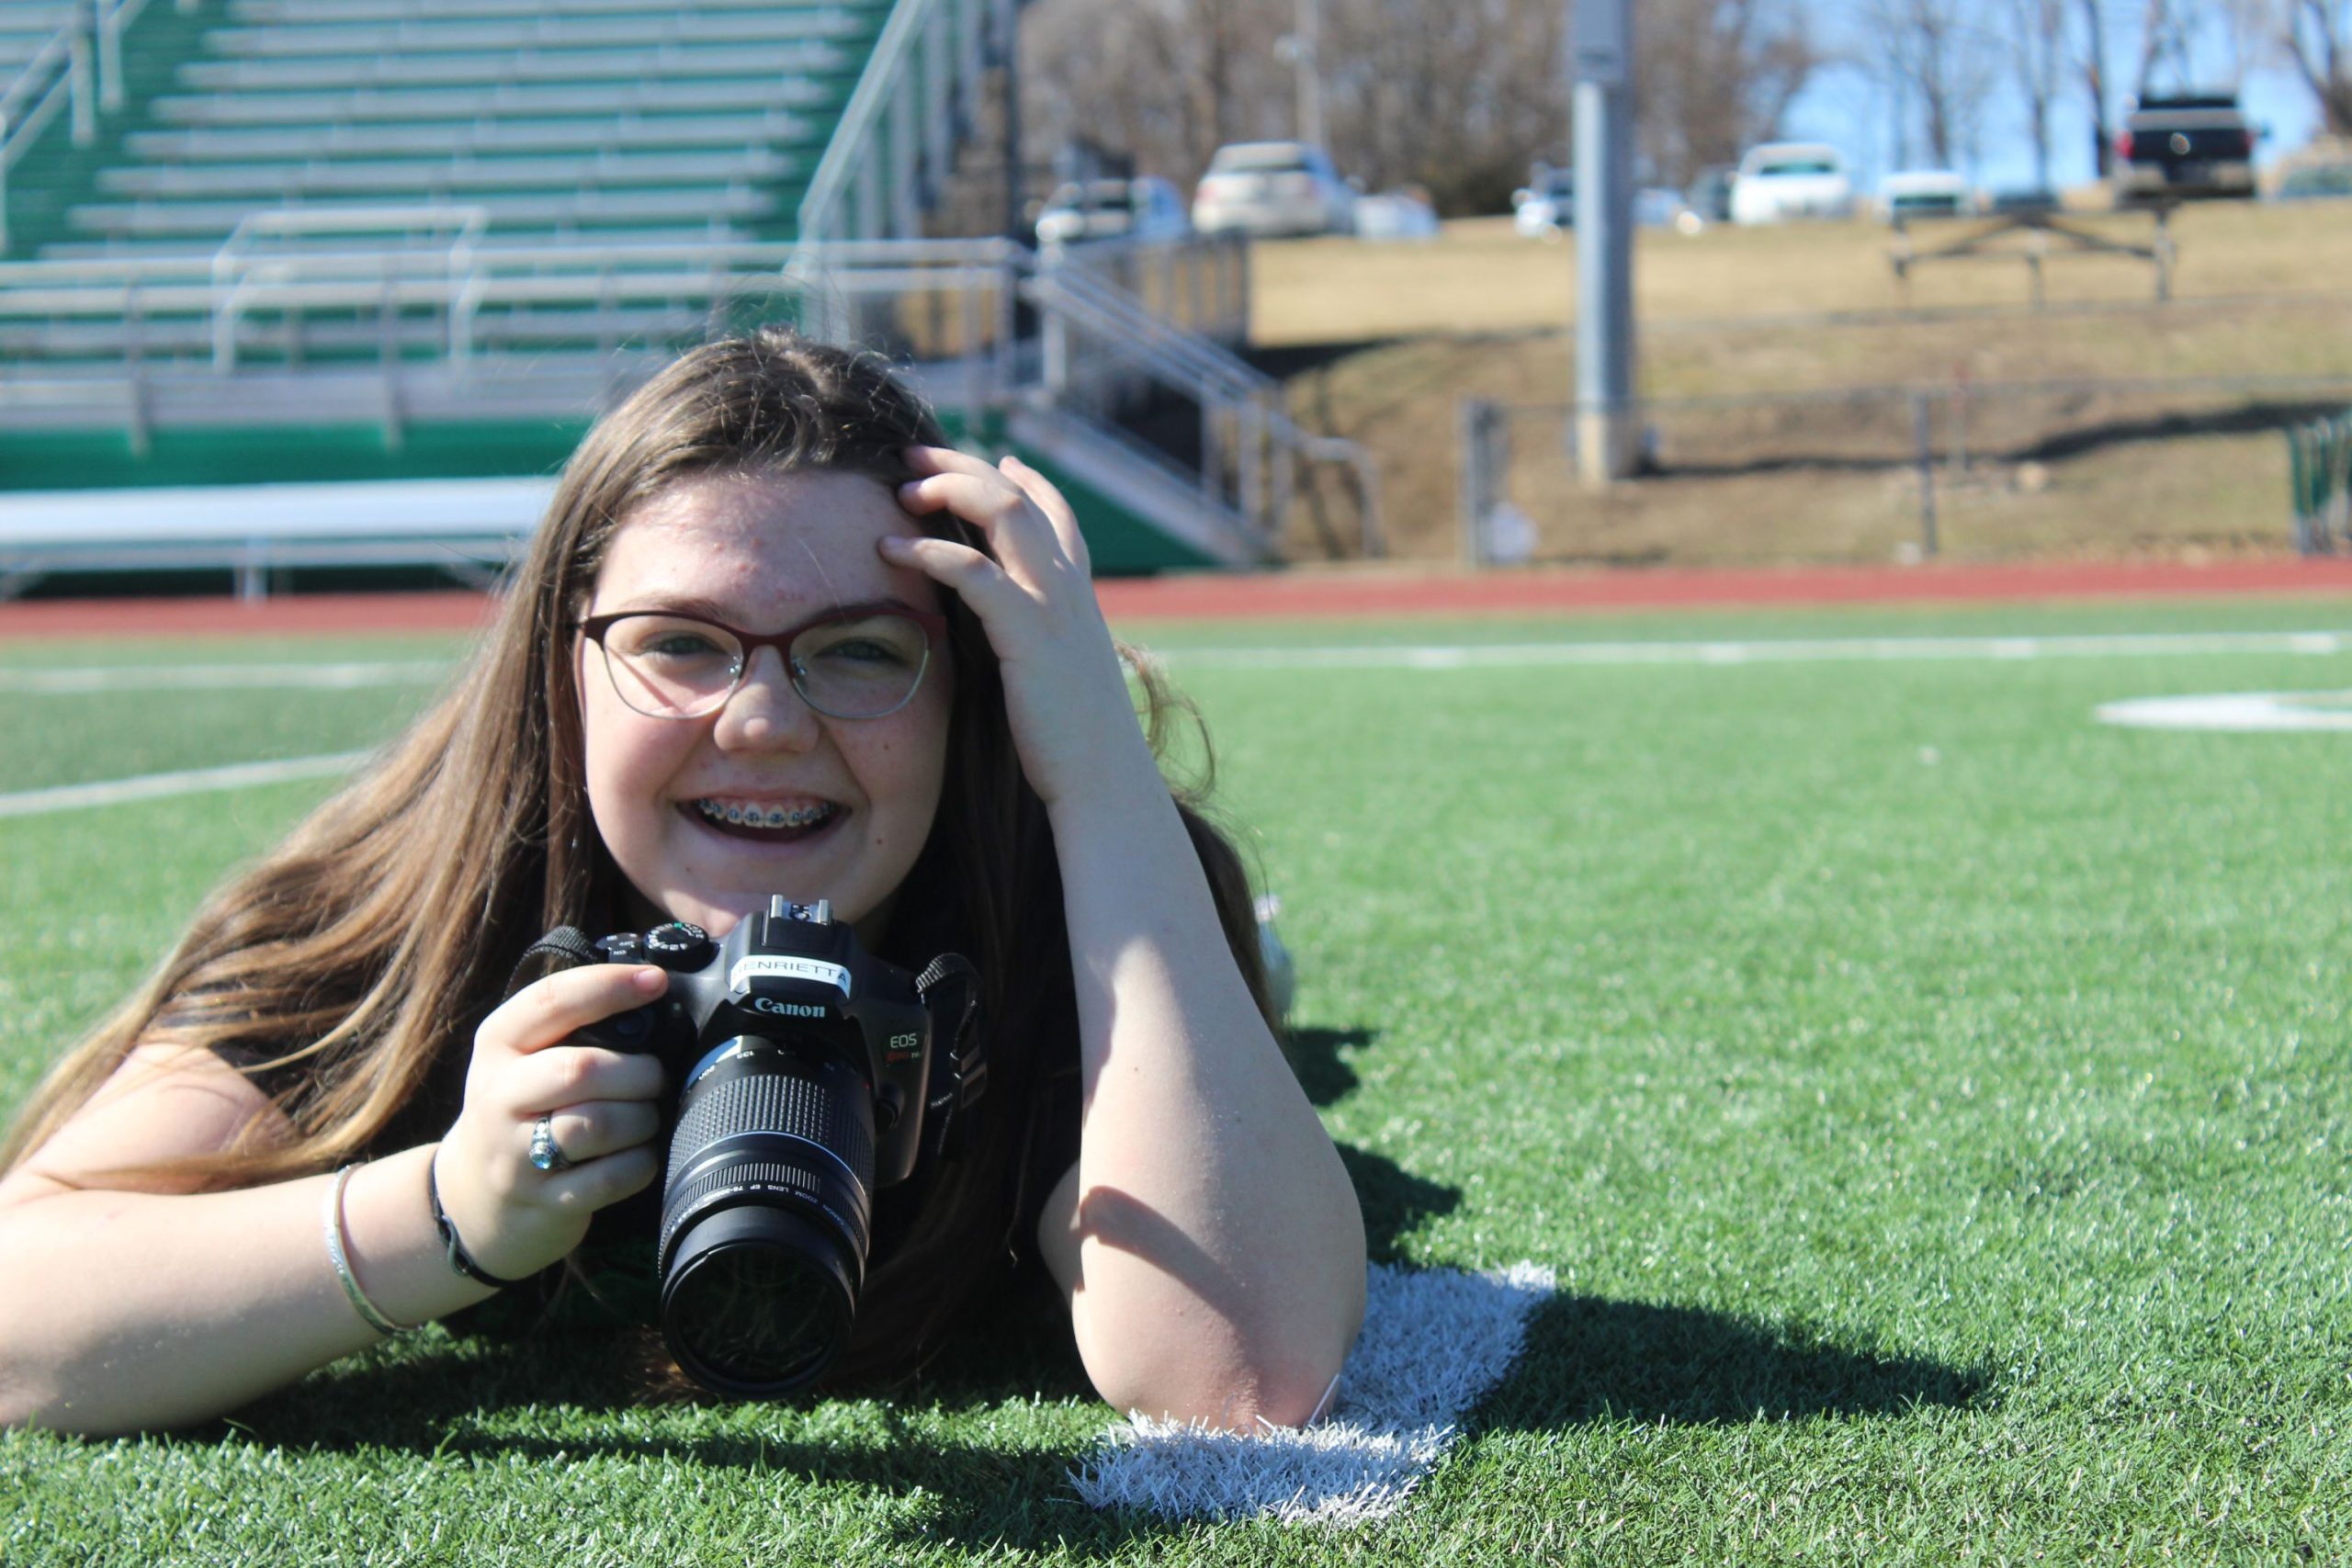 A girl laying on her stomach on a football field, holding a camera and smiling.